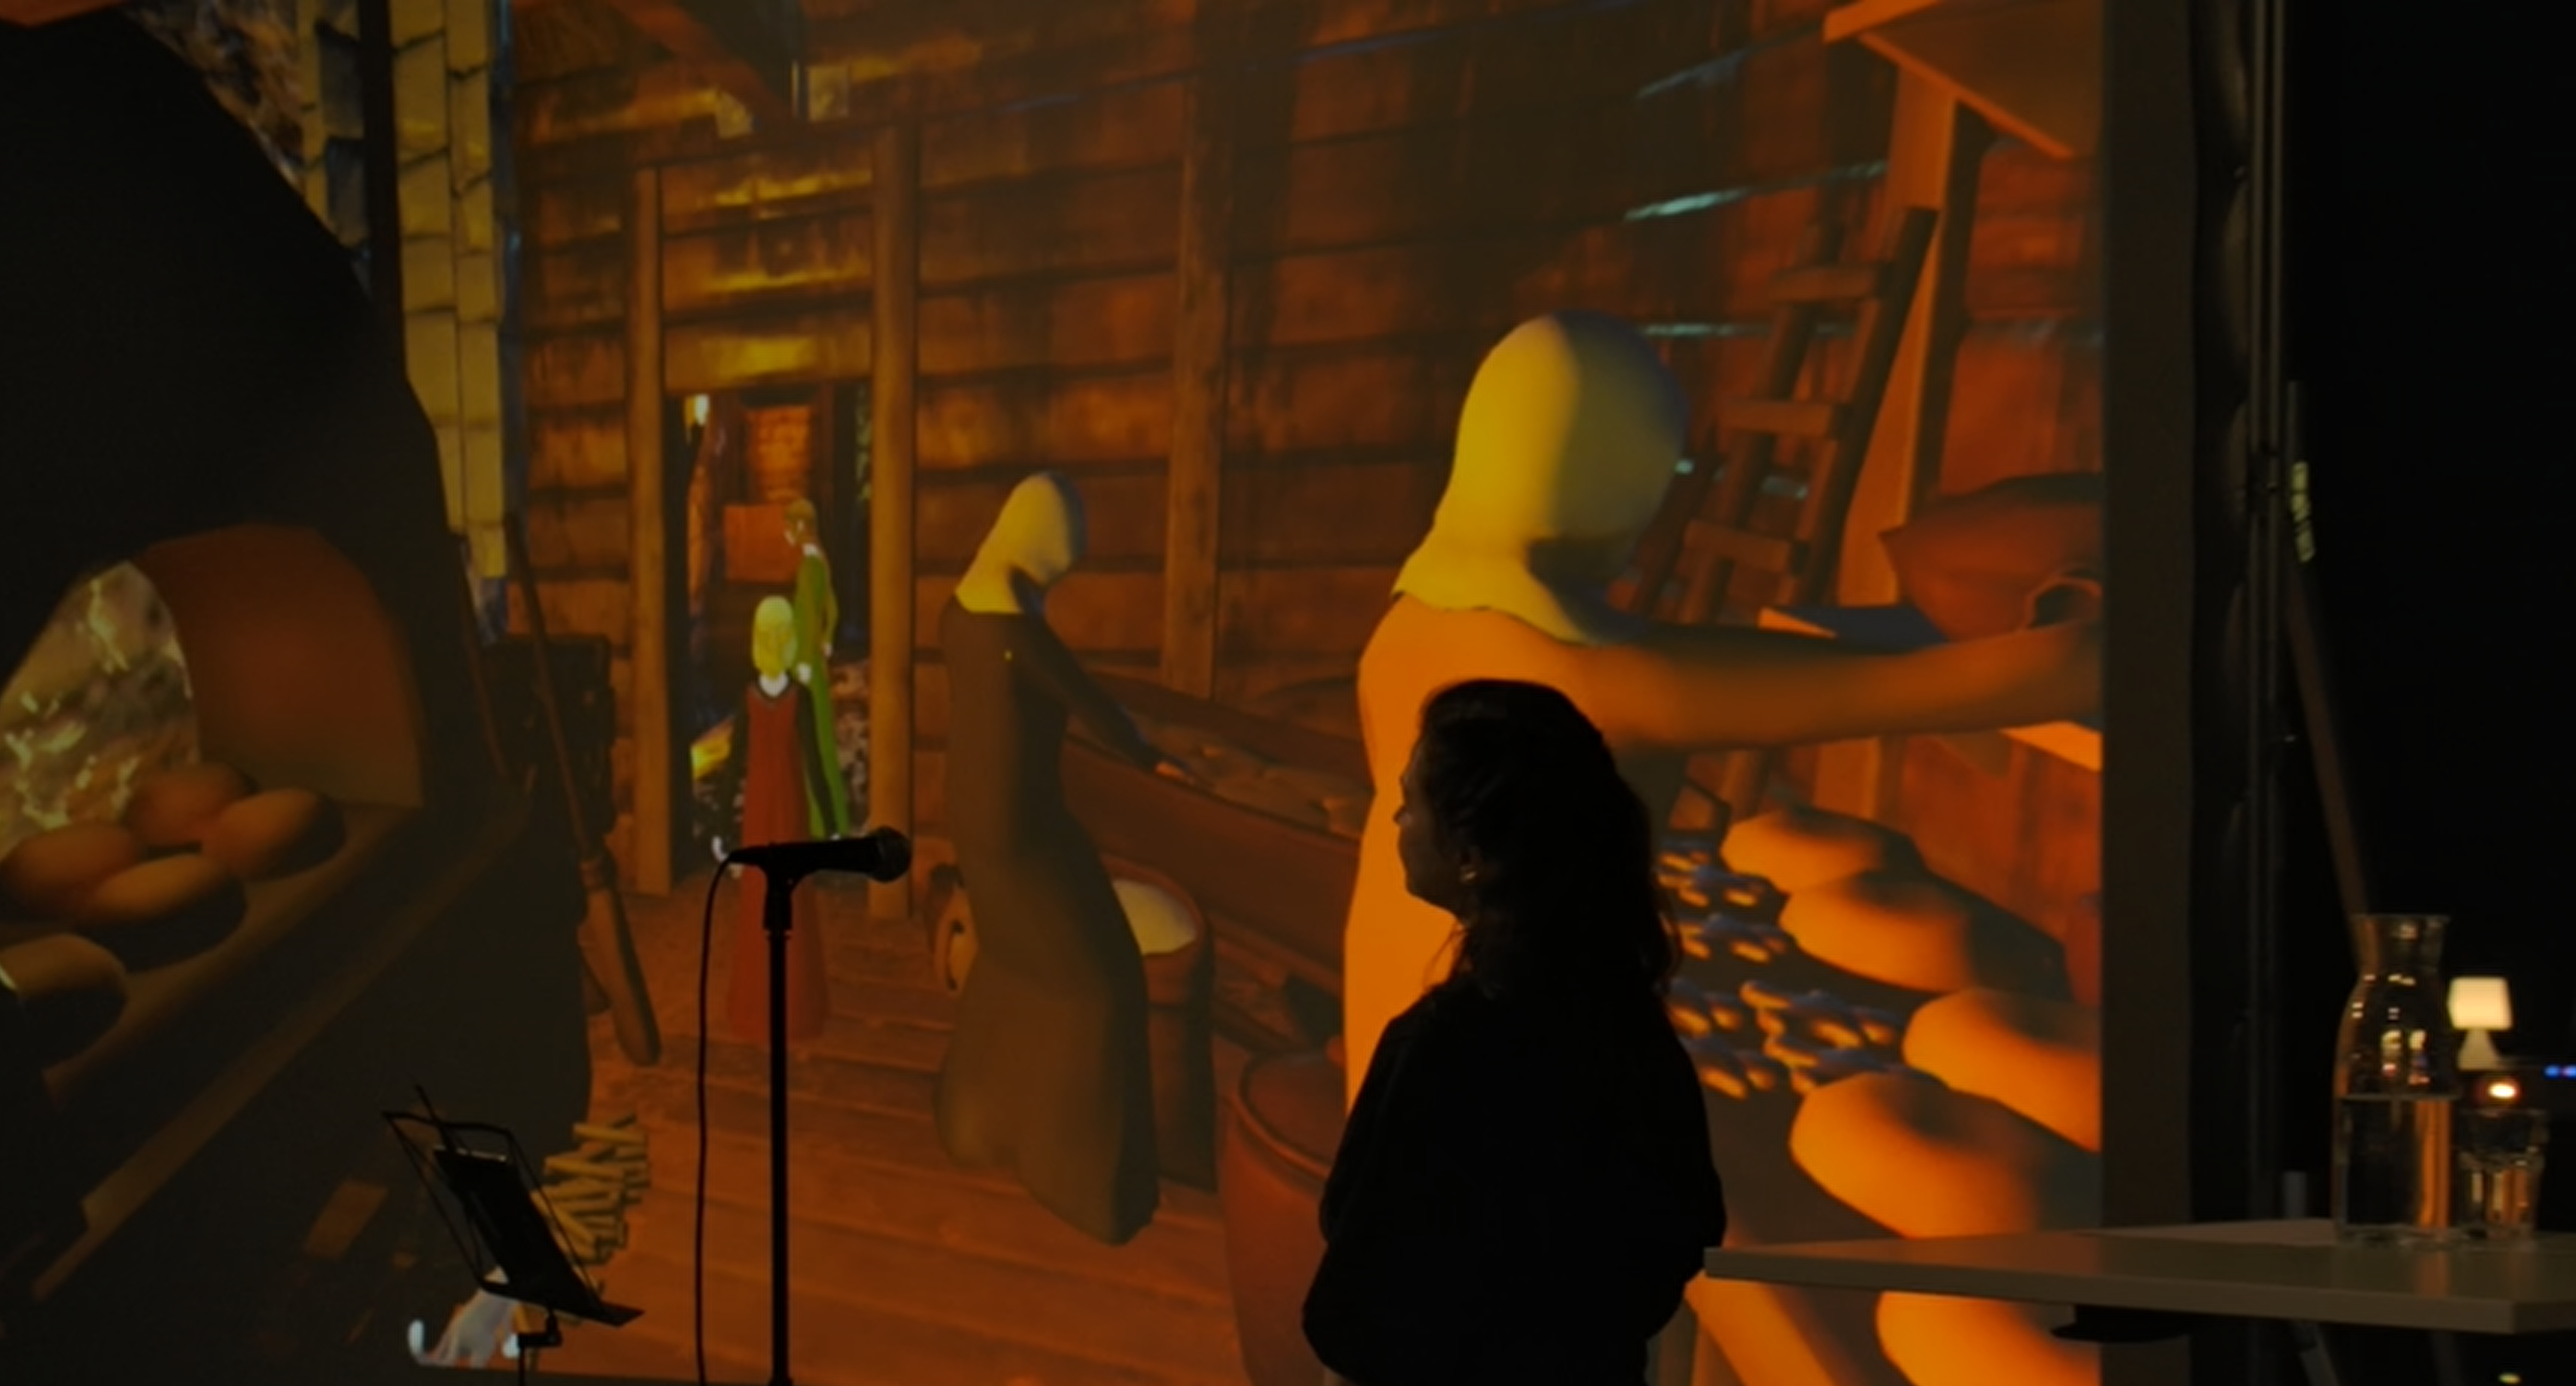 Kariina Gretere sings live to realtime playthrough of Queens Game at Artistic Research Café